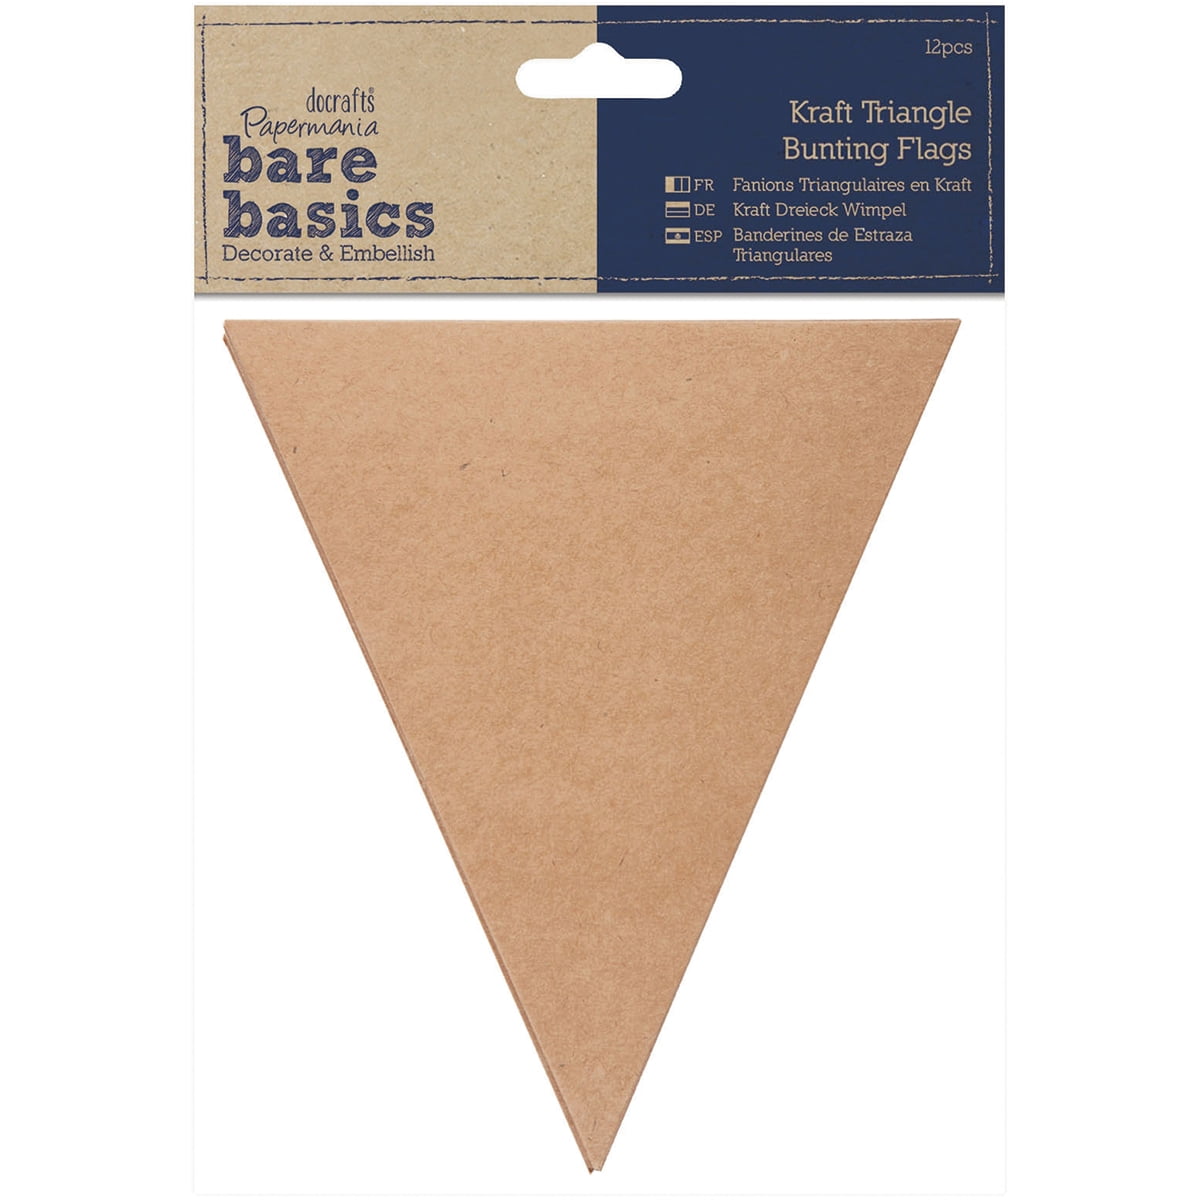 Papermania Bare Basics Kraft Small Triangle Buntings Table Favours Decorations 